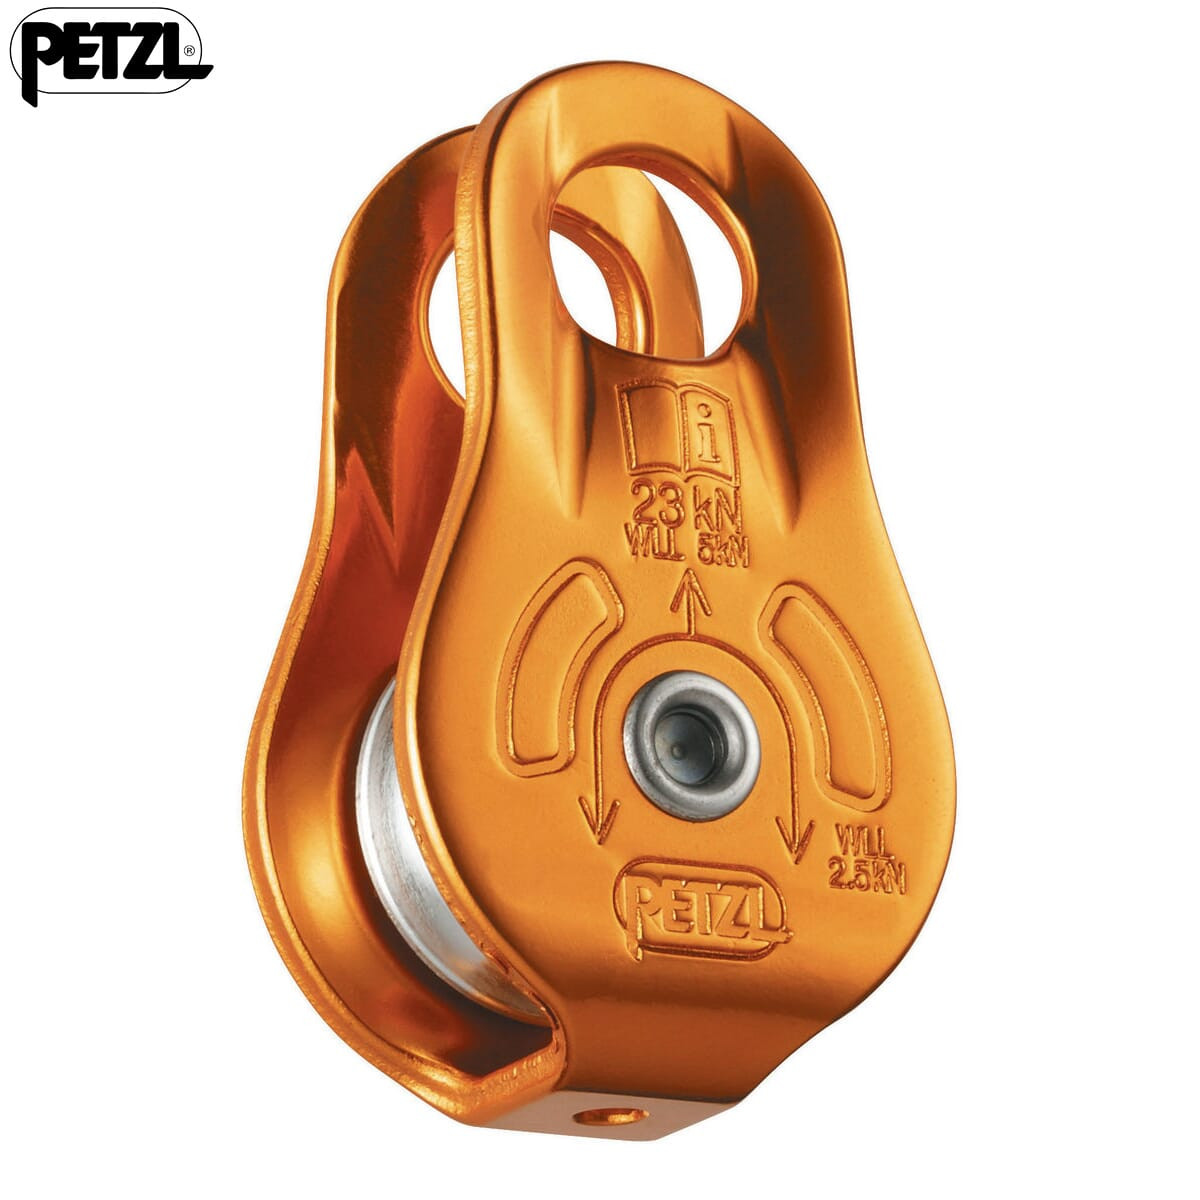 Petzl Fixe Pulley Versatile and Compact